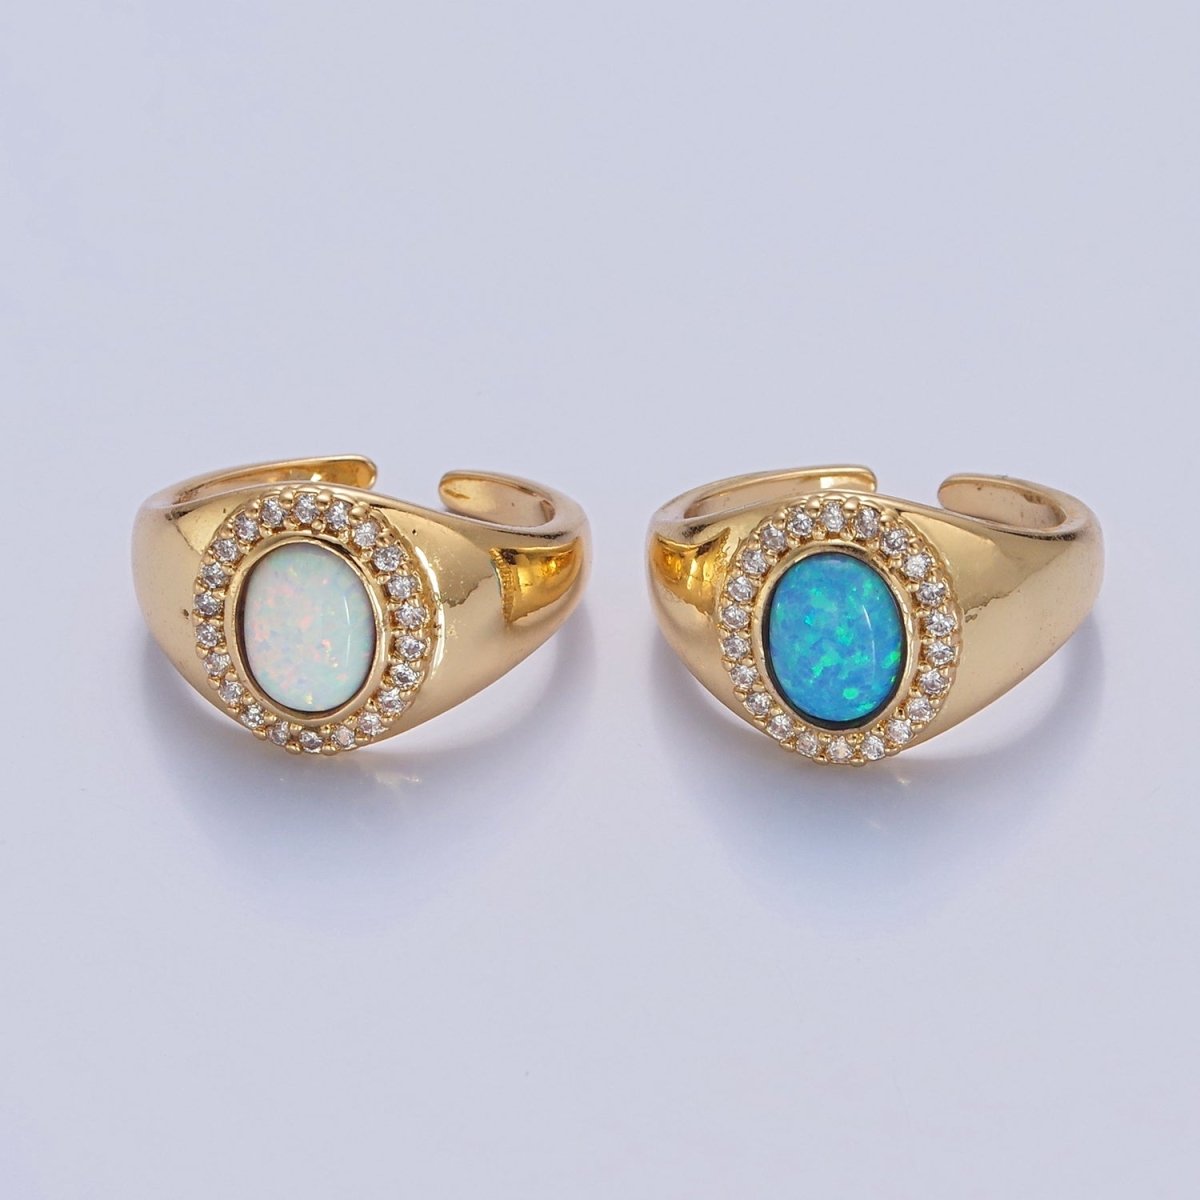 Oval Ring, Opal Ring, Statement Ring, Dainty Ring, Signet Ring O-2215 O-2216 - DLUXCA